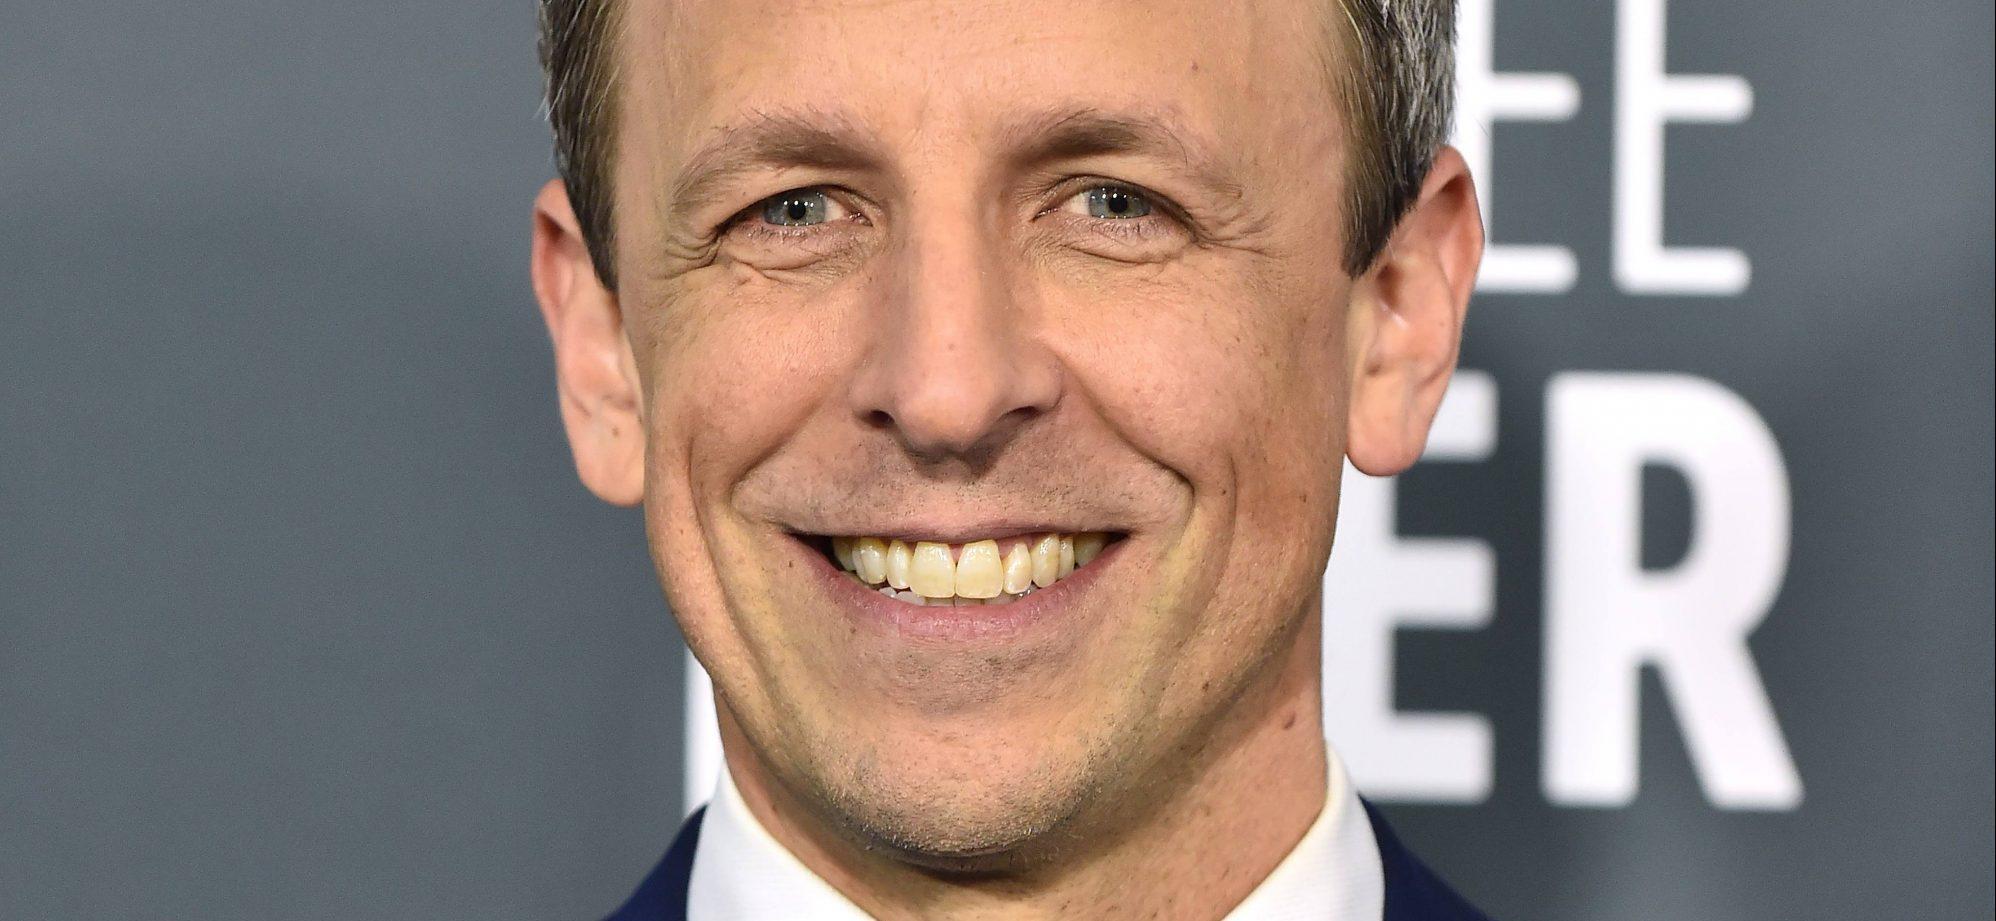 Seth Meyers And Other Comedians Weigh In On Their Own ‘Close Calls’ After Oscars Slap